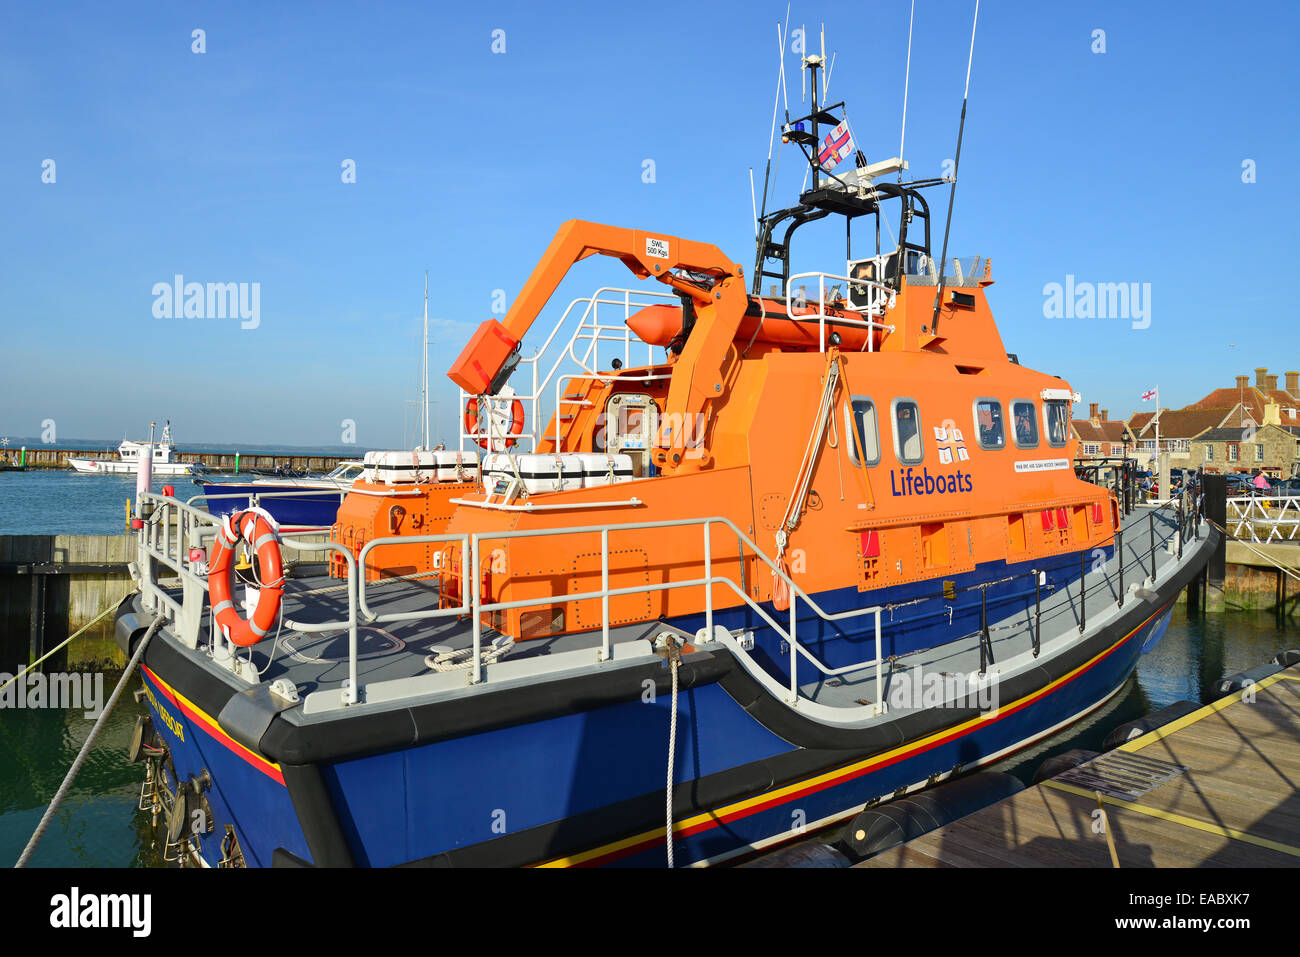 Die Royal National Lifeboat Institution (RNLI) Rettungsboot, Yarmouth Harbour, Yarmouth, Isle Of Wight, England, Vereinigtes Königreich Stockfoto